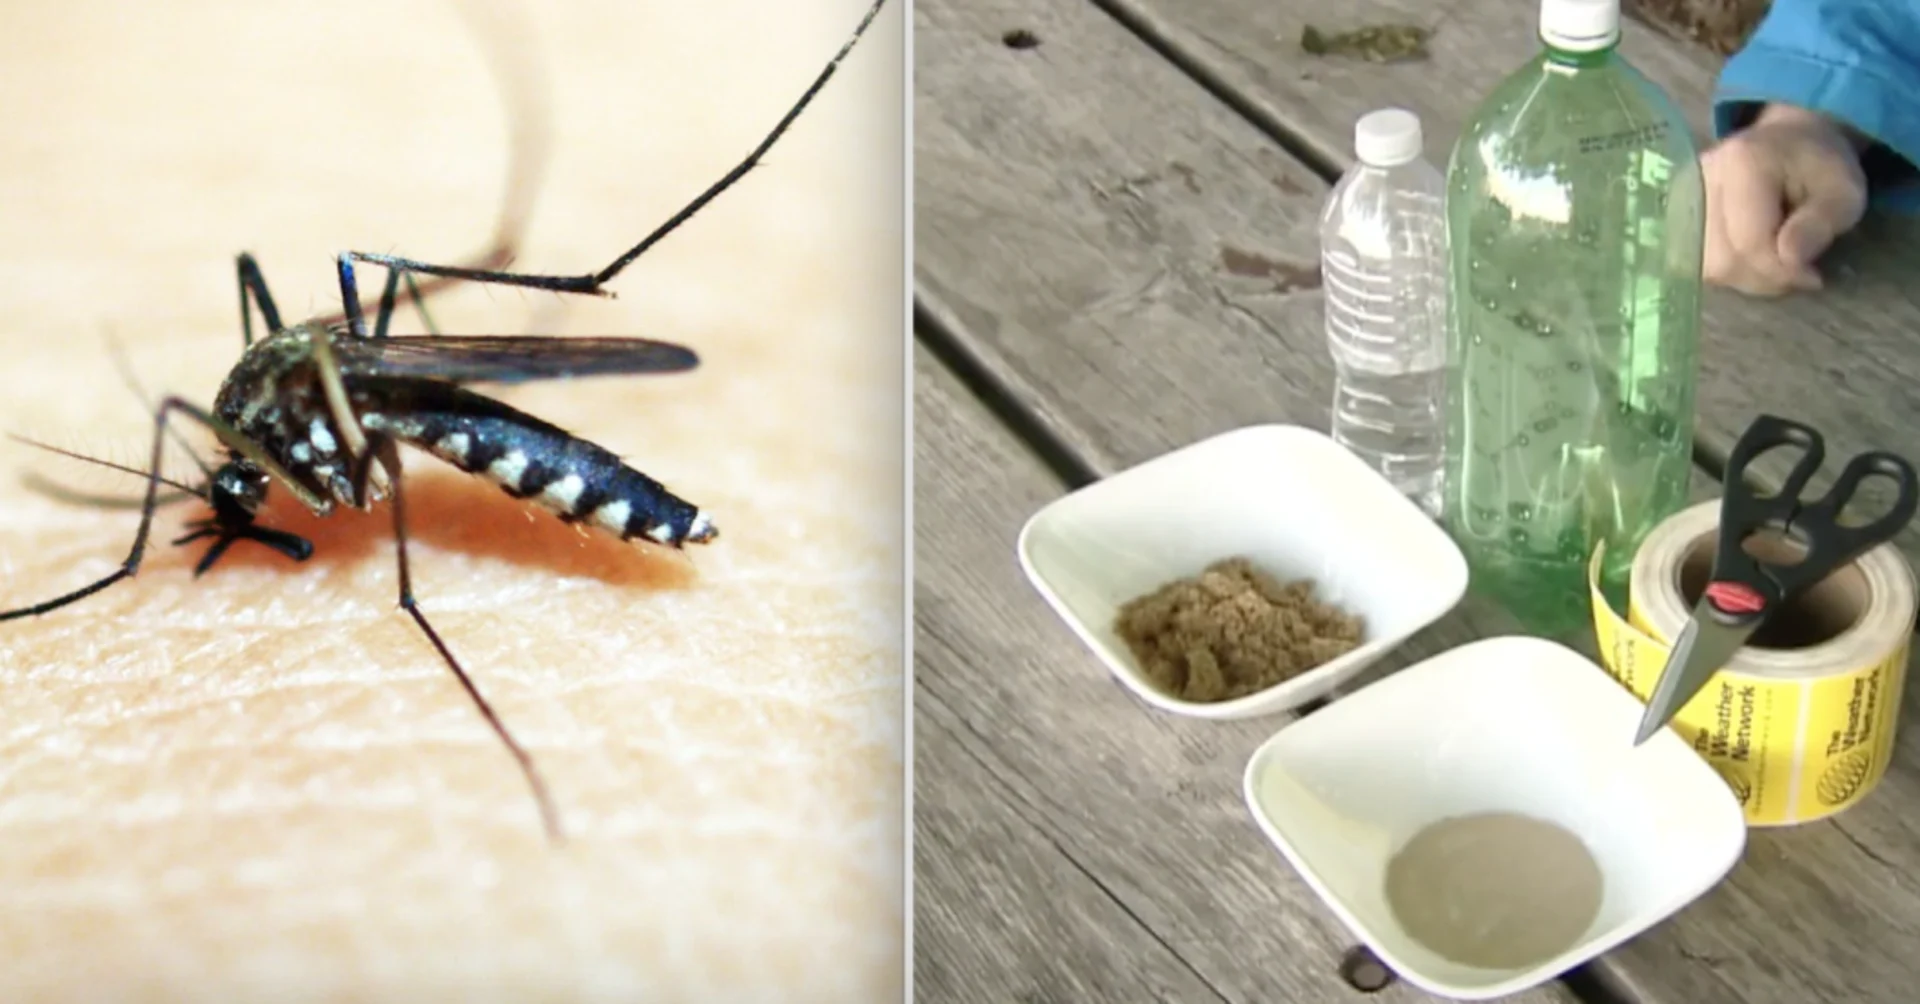 Keep mosquitoes away with this one weird trick